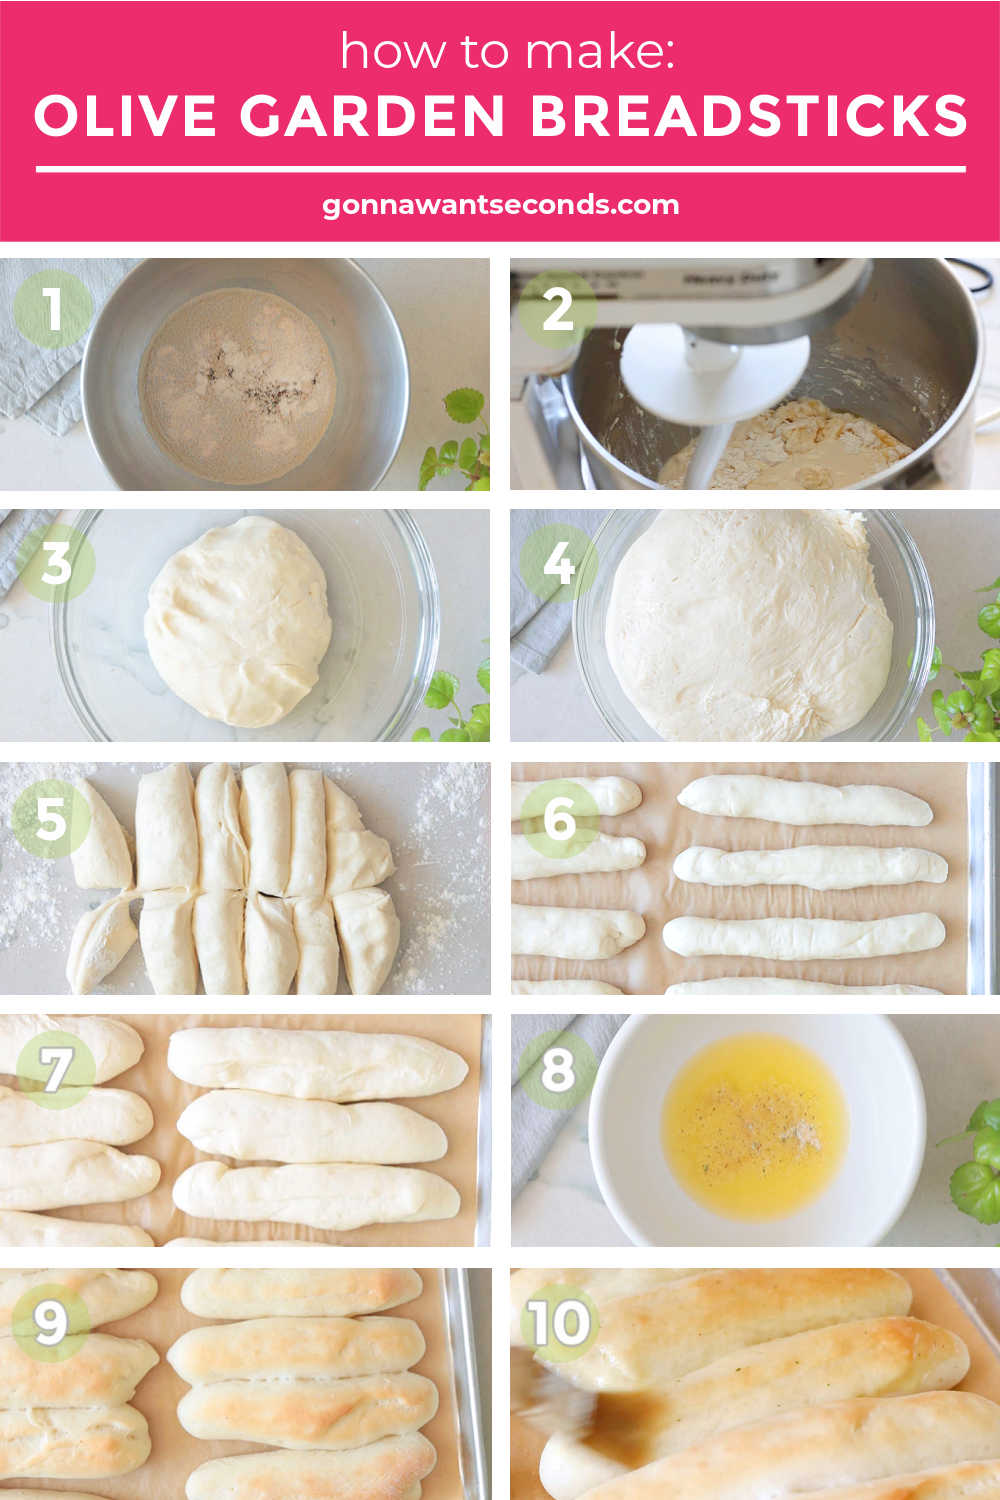 Step by step How to make Olive Garden Breadsticks